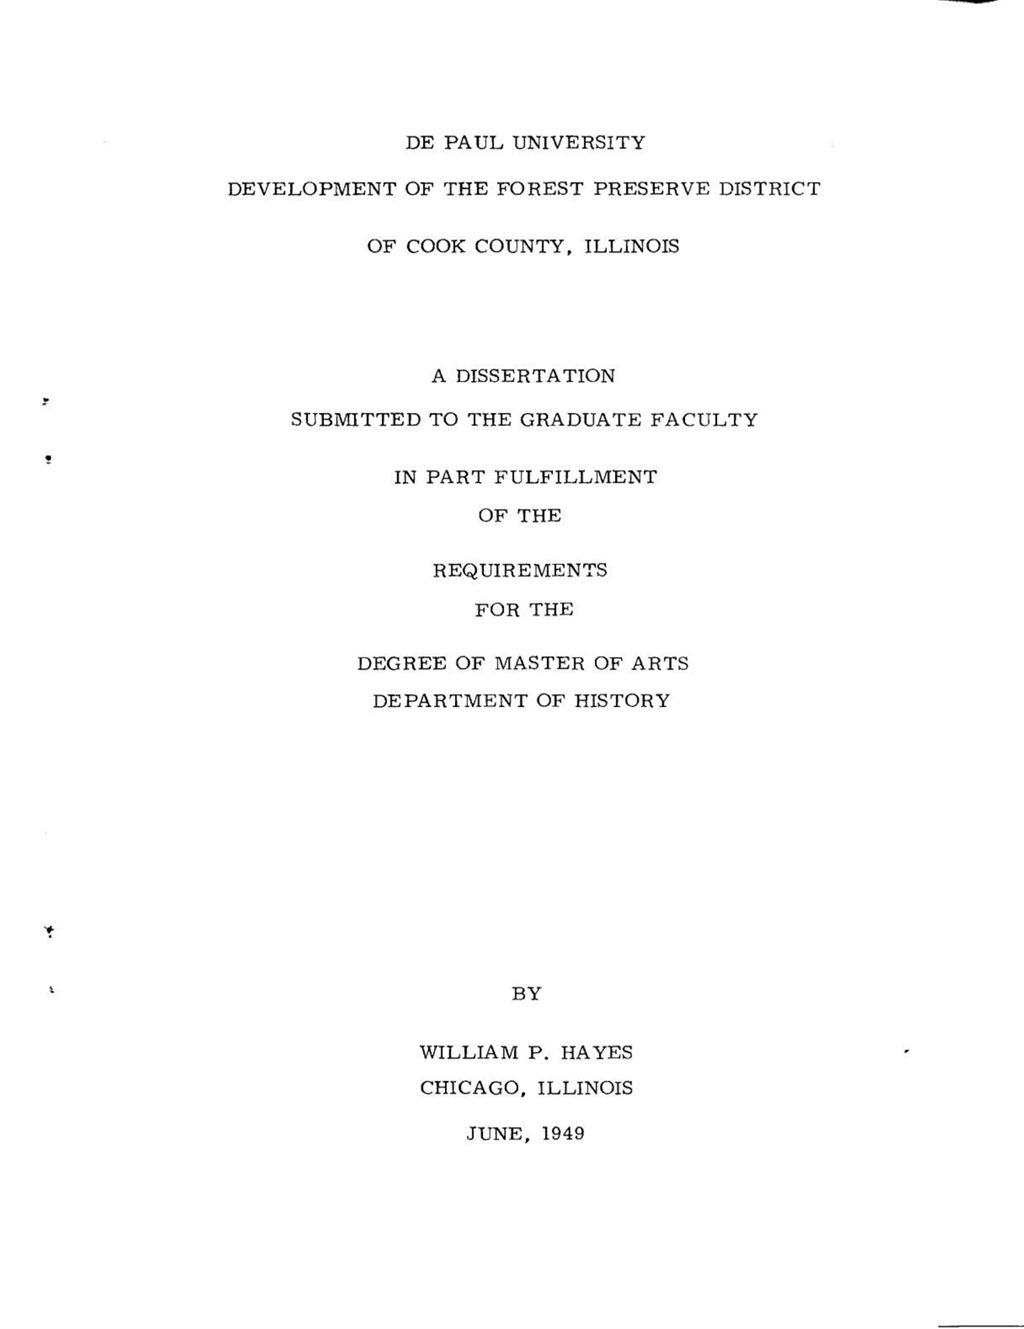 Dissertation about Forest Preserves by William P. Hayes, 1949